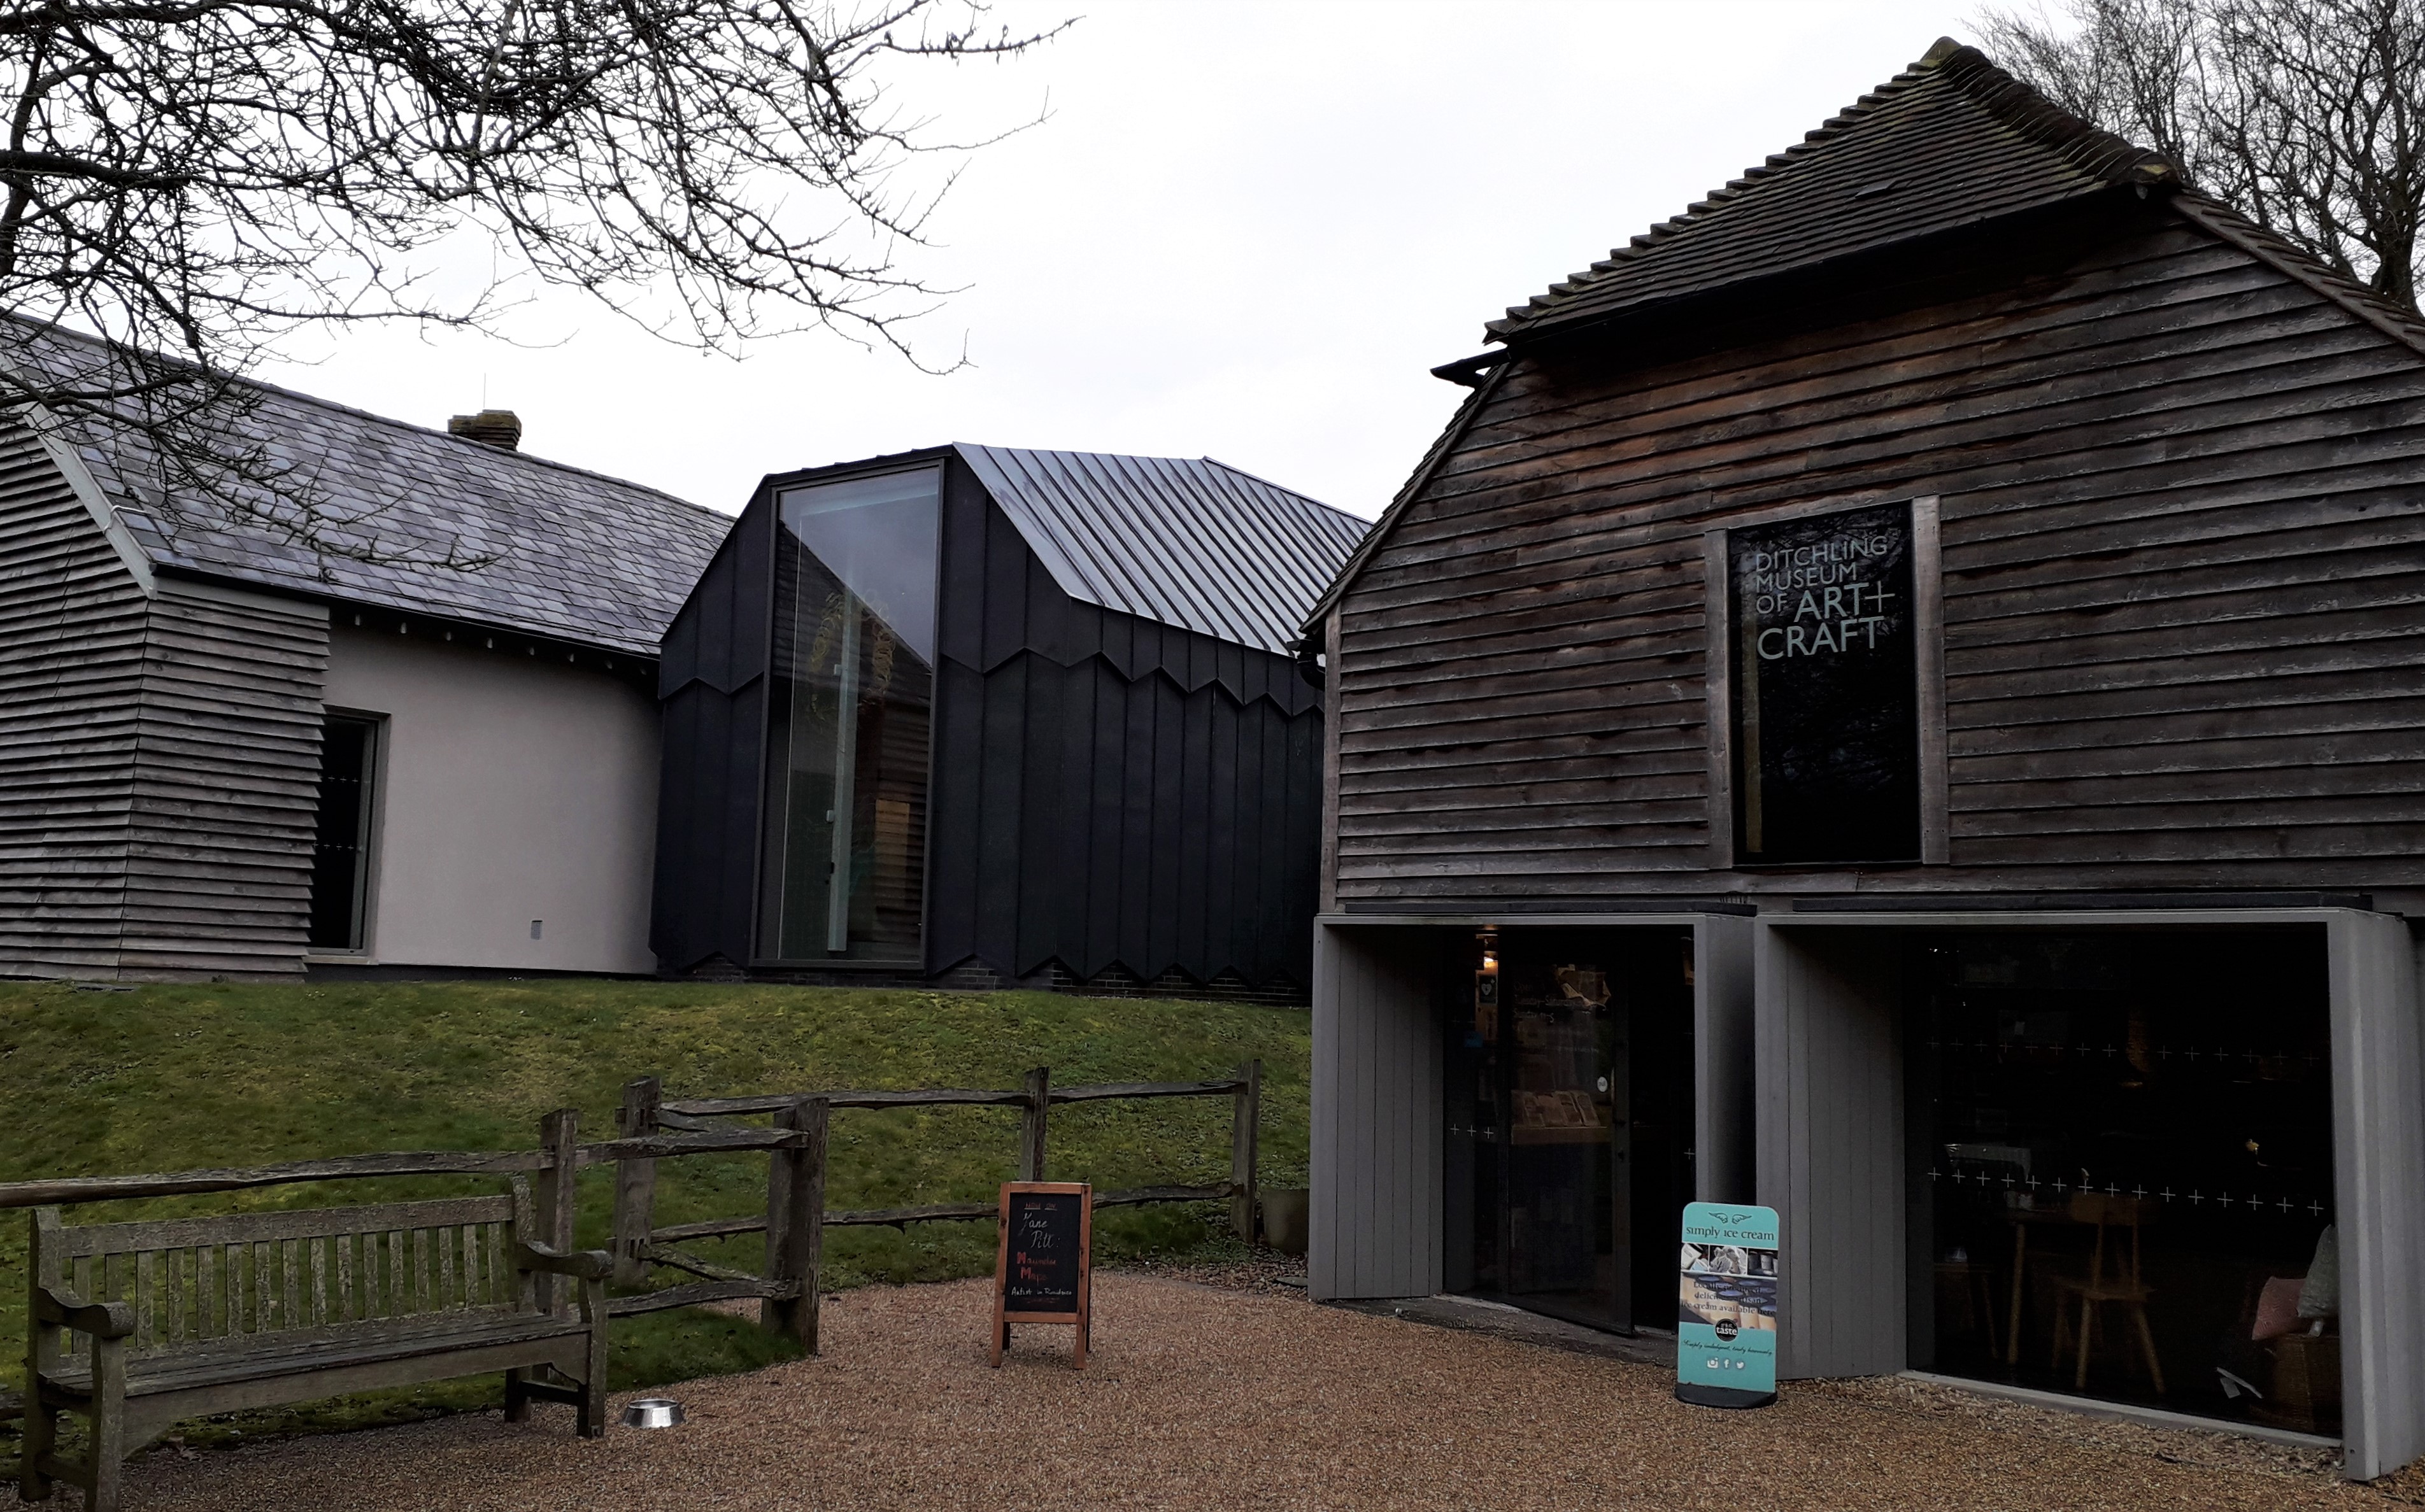 Home - Ditchling Museum of Art + Craft